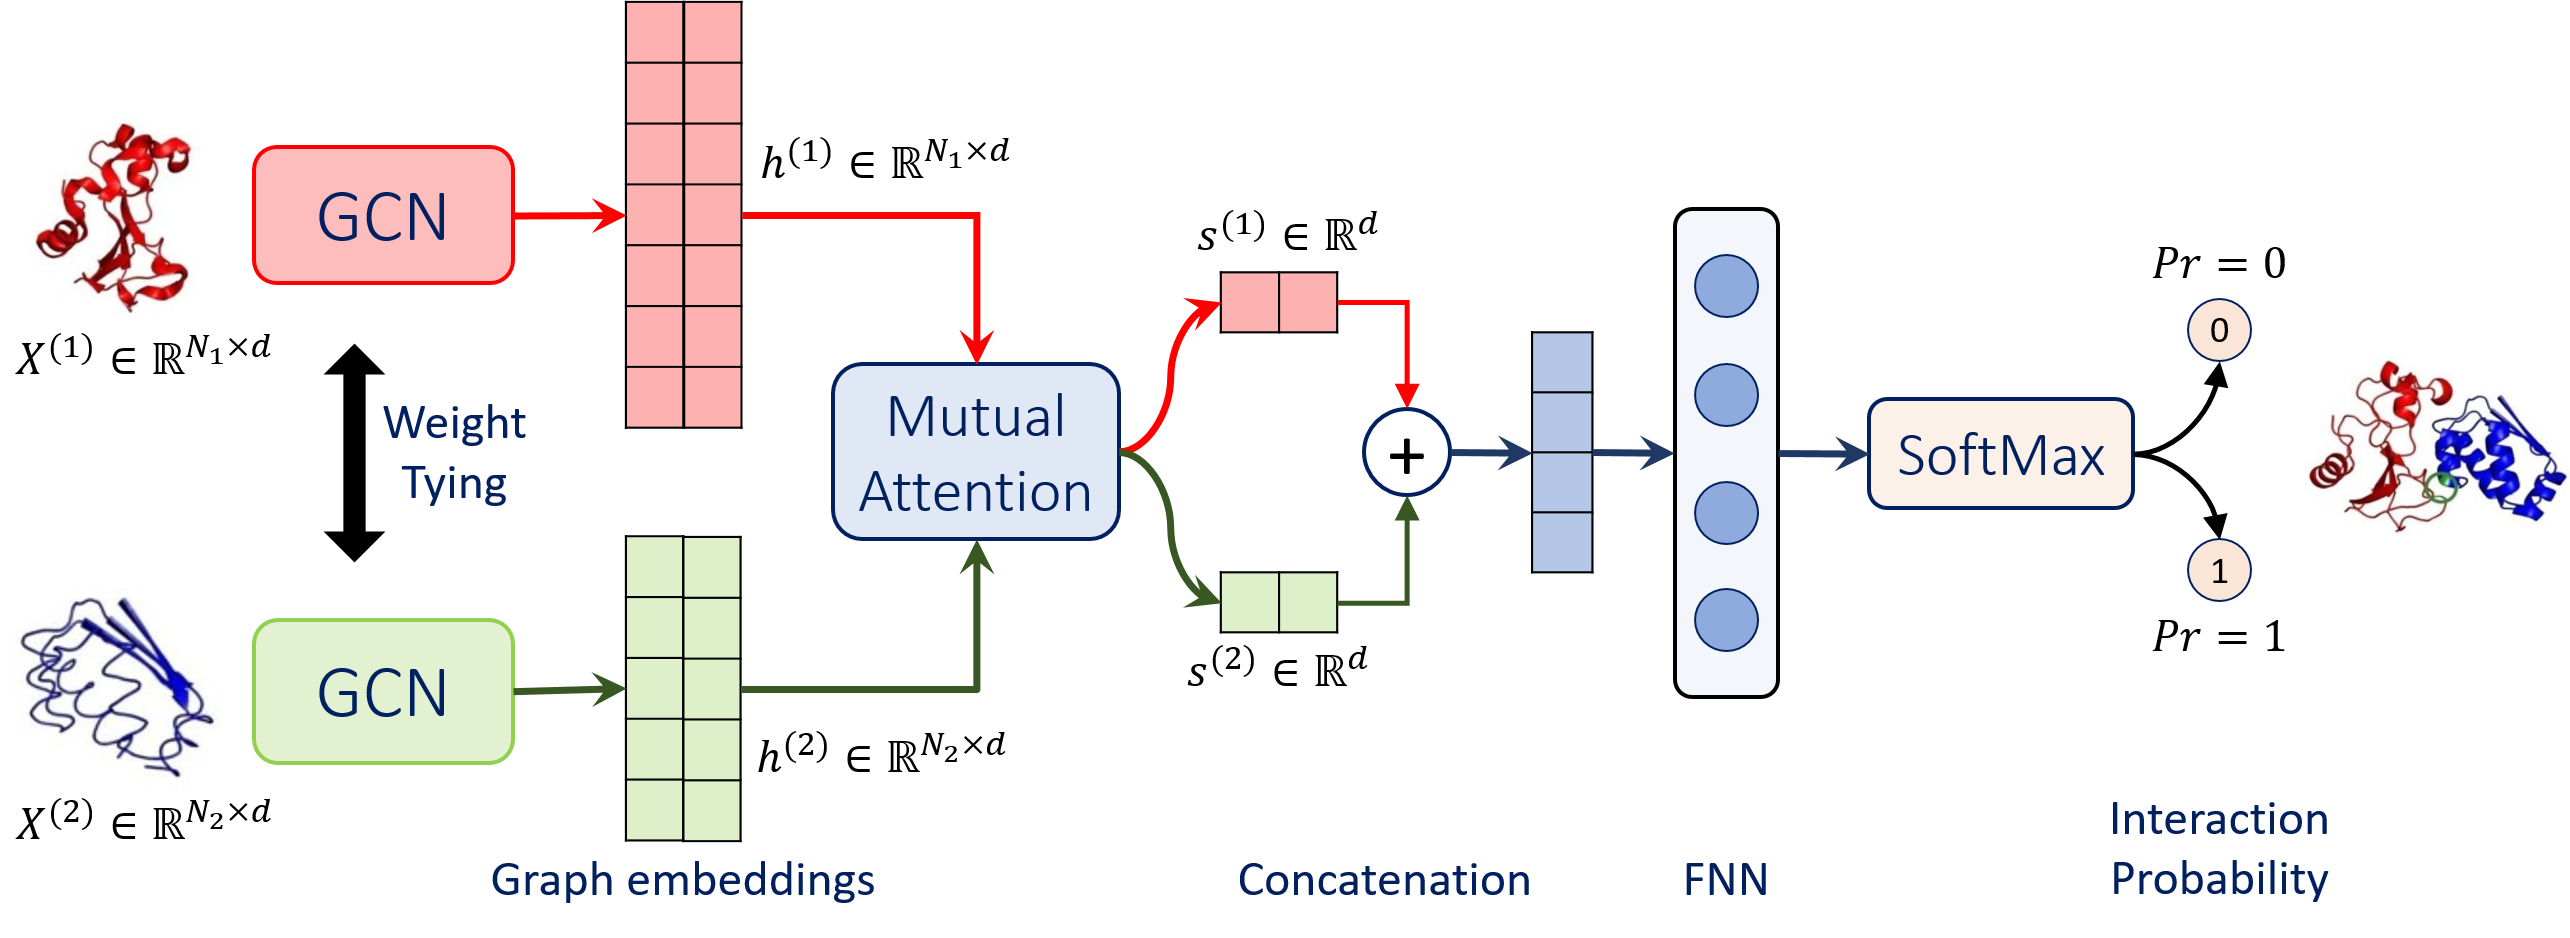 Proposed GCN architecture with Mutual Attention Mechanism